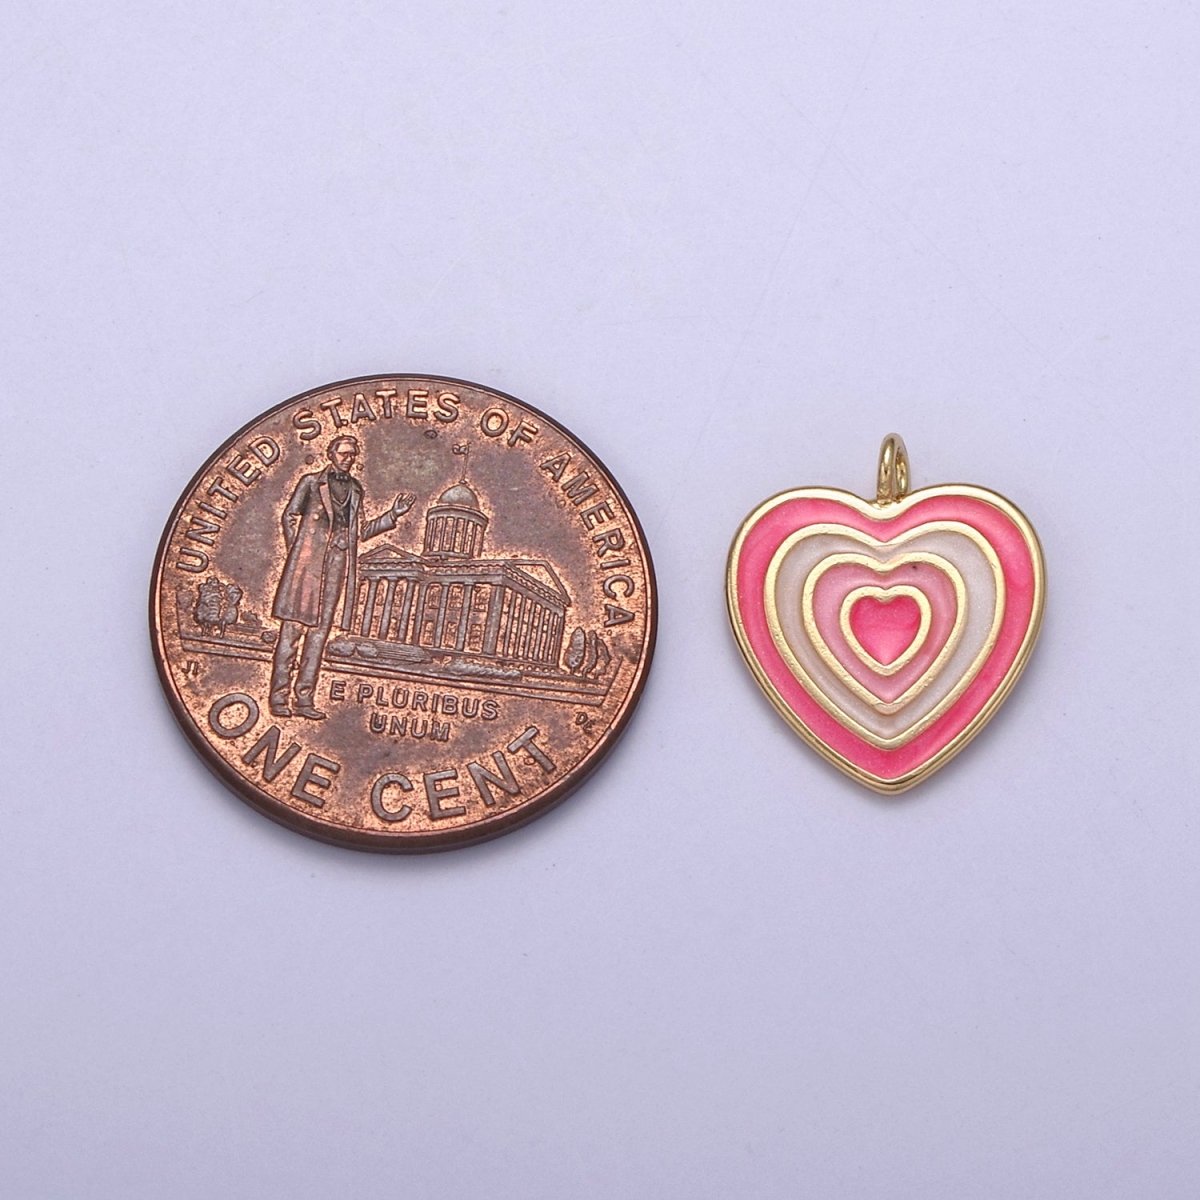 OS Dainty Pink Heart Charm Color Enamel Heart Charm | Valentine's Day Charms N-881 - DLUXCA